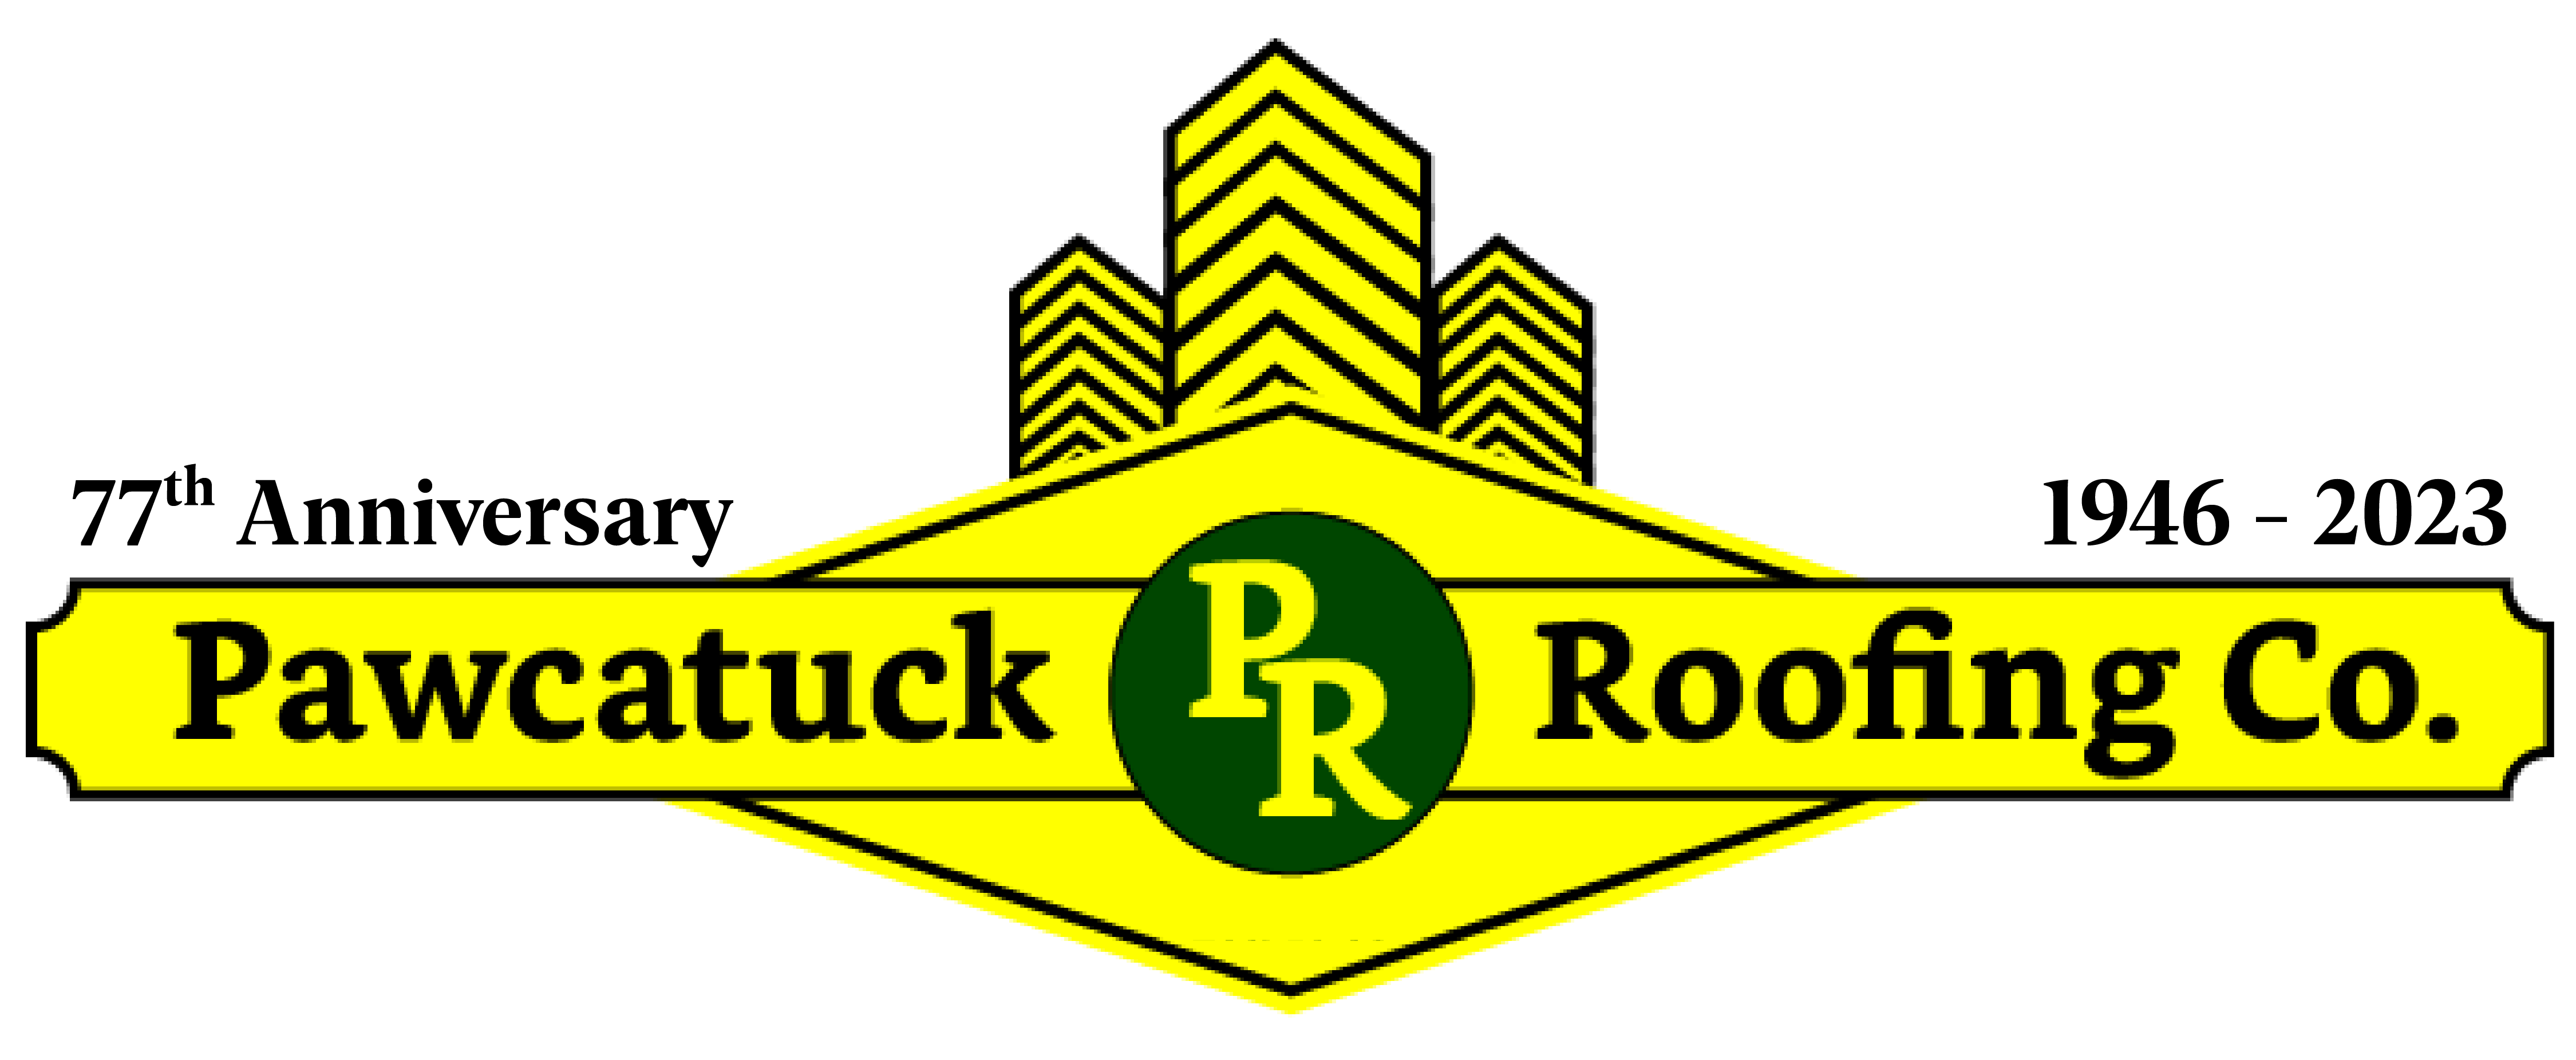 Pawcatuck Roofing Company roofing company in Rhode Island